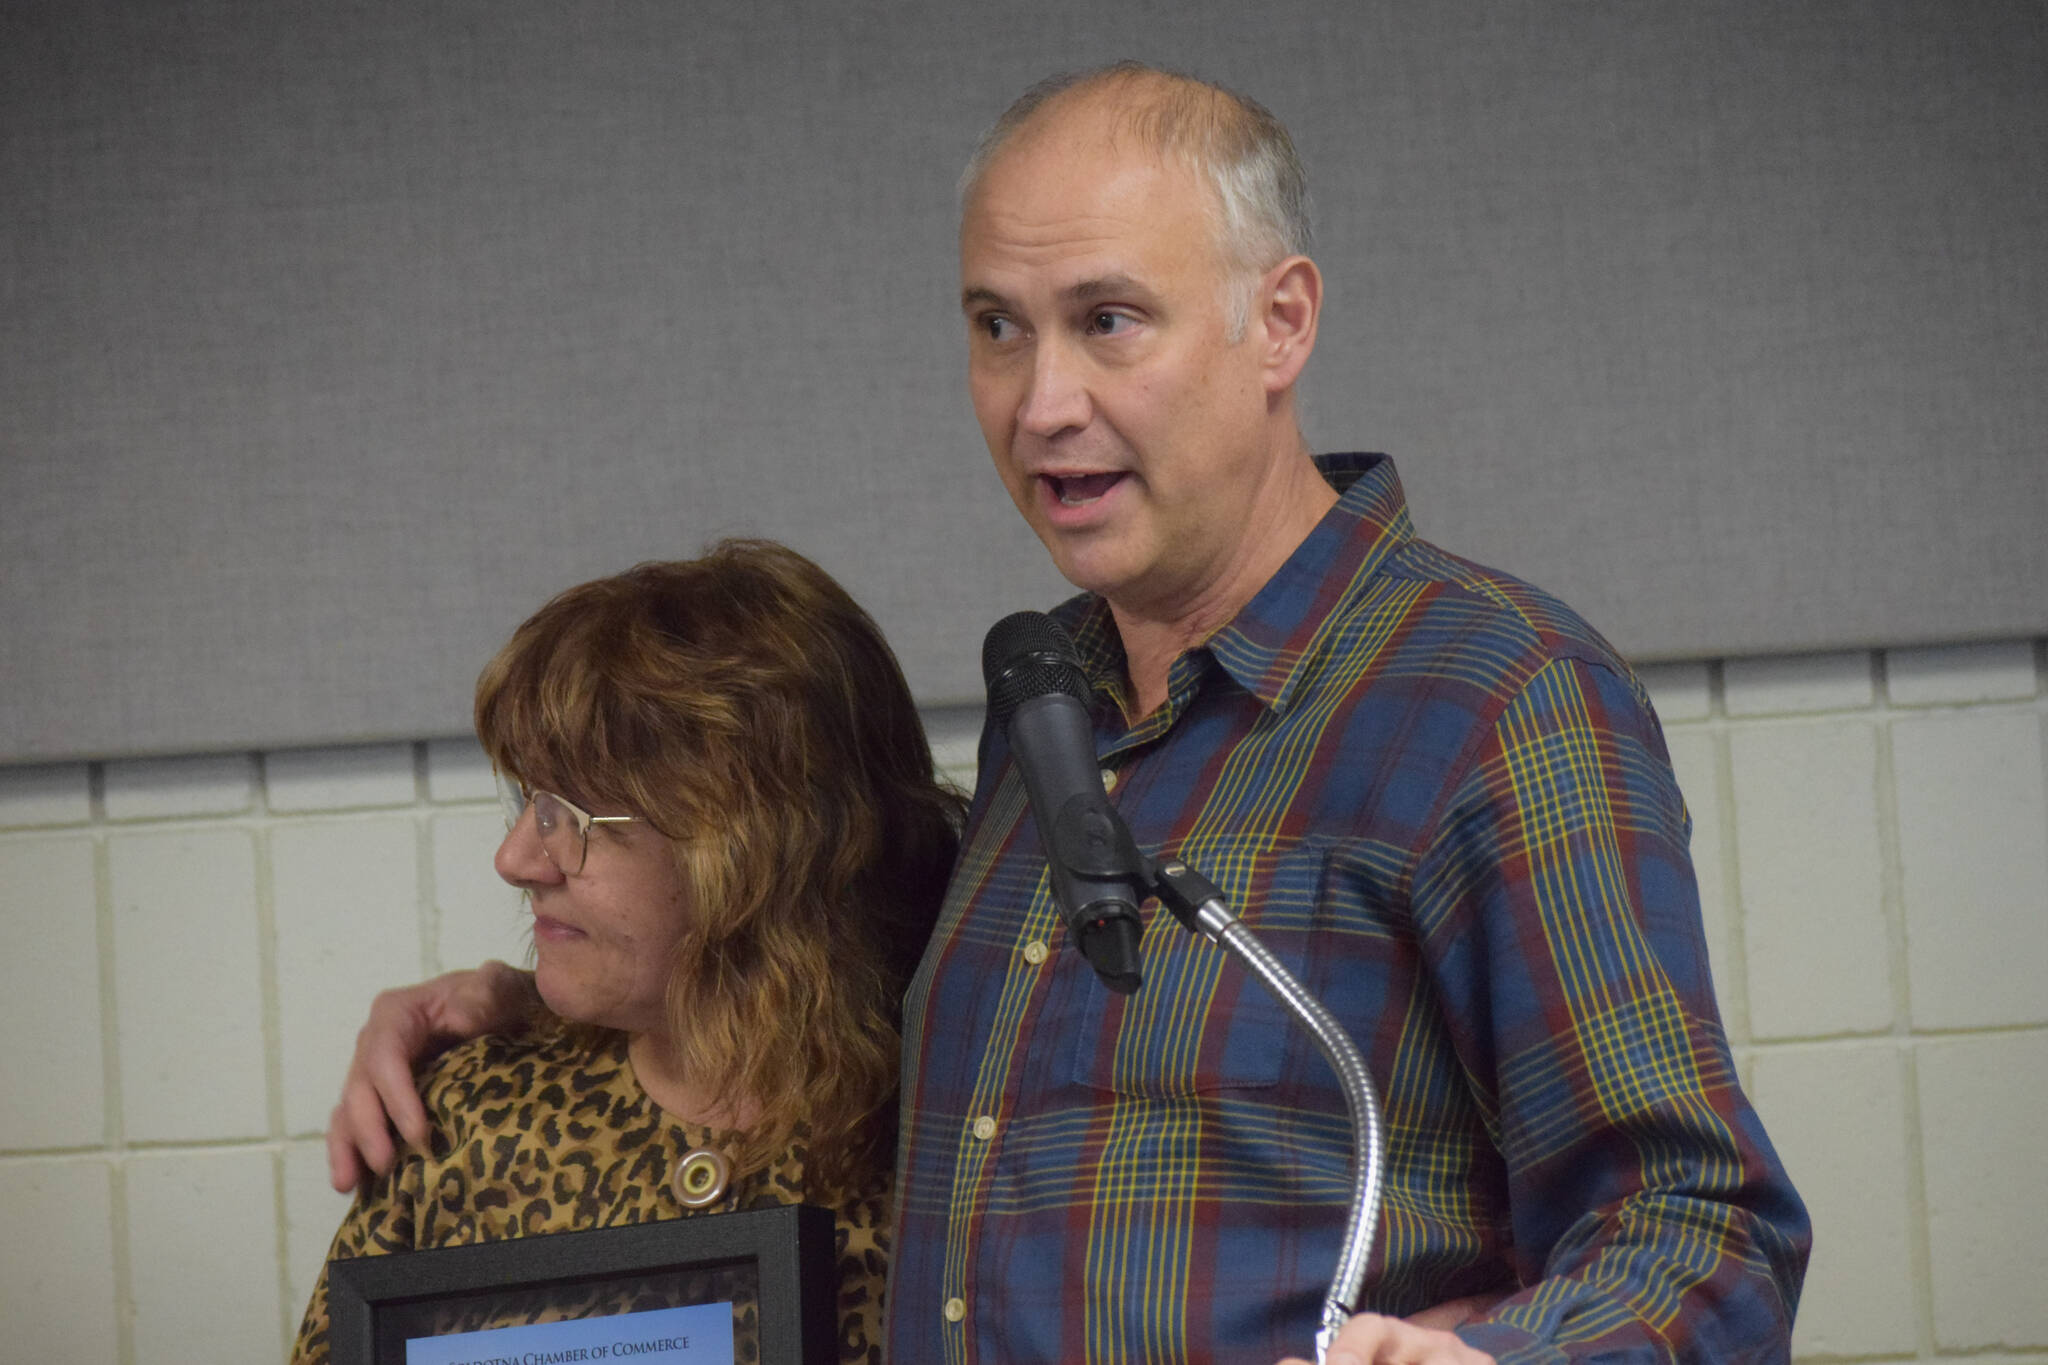 Mary Krull, with husband Henry Krull, accept the Soldotna Chamber of Commerce’s business of the year award for their work at Brew 602 and Addie Camp during the chamber’s 2021 award ceremony at the Soldotna Regional Sports Complex on Wednesday, Feb. 9, 2022. (Camille Botello/Peninsula Clarion)